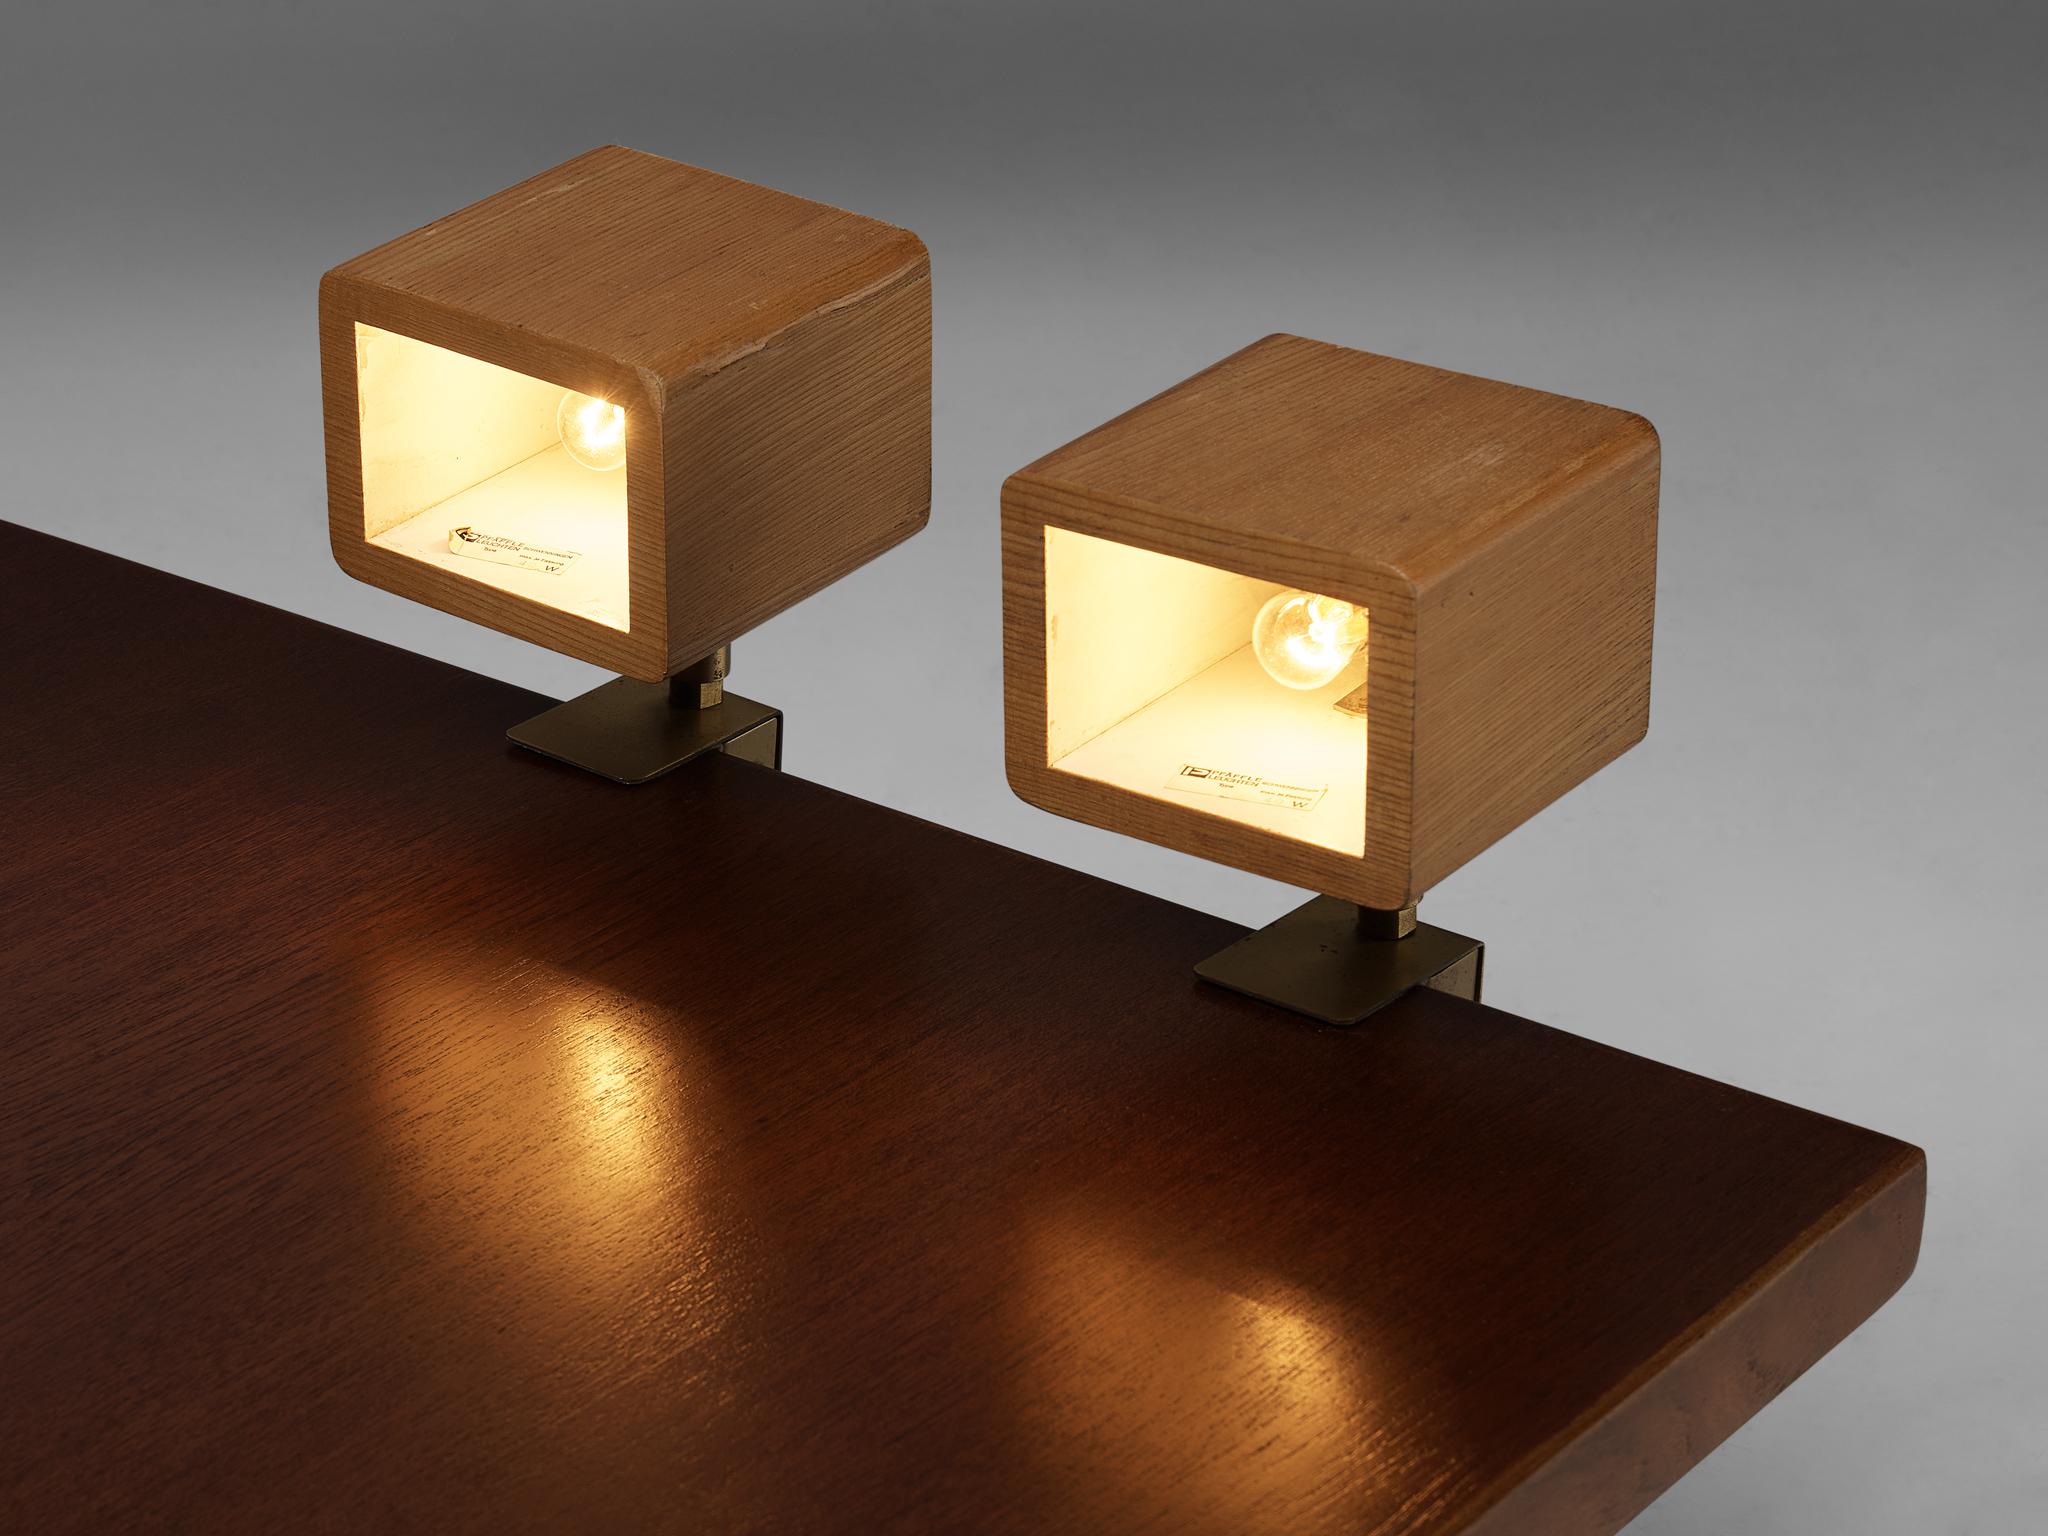 Pfäffle Leuchten Schwenningen, Pair of desk lamps, veneer wood, brass, Germany, 1950s

This well-designed pair of desk lamps embodies a modern and clean aesthetics based on a solid construction executed in solely honest, materials. The lampshade